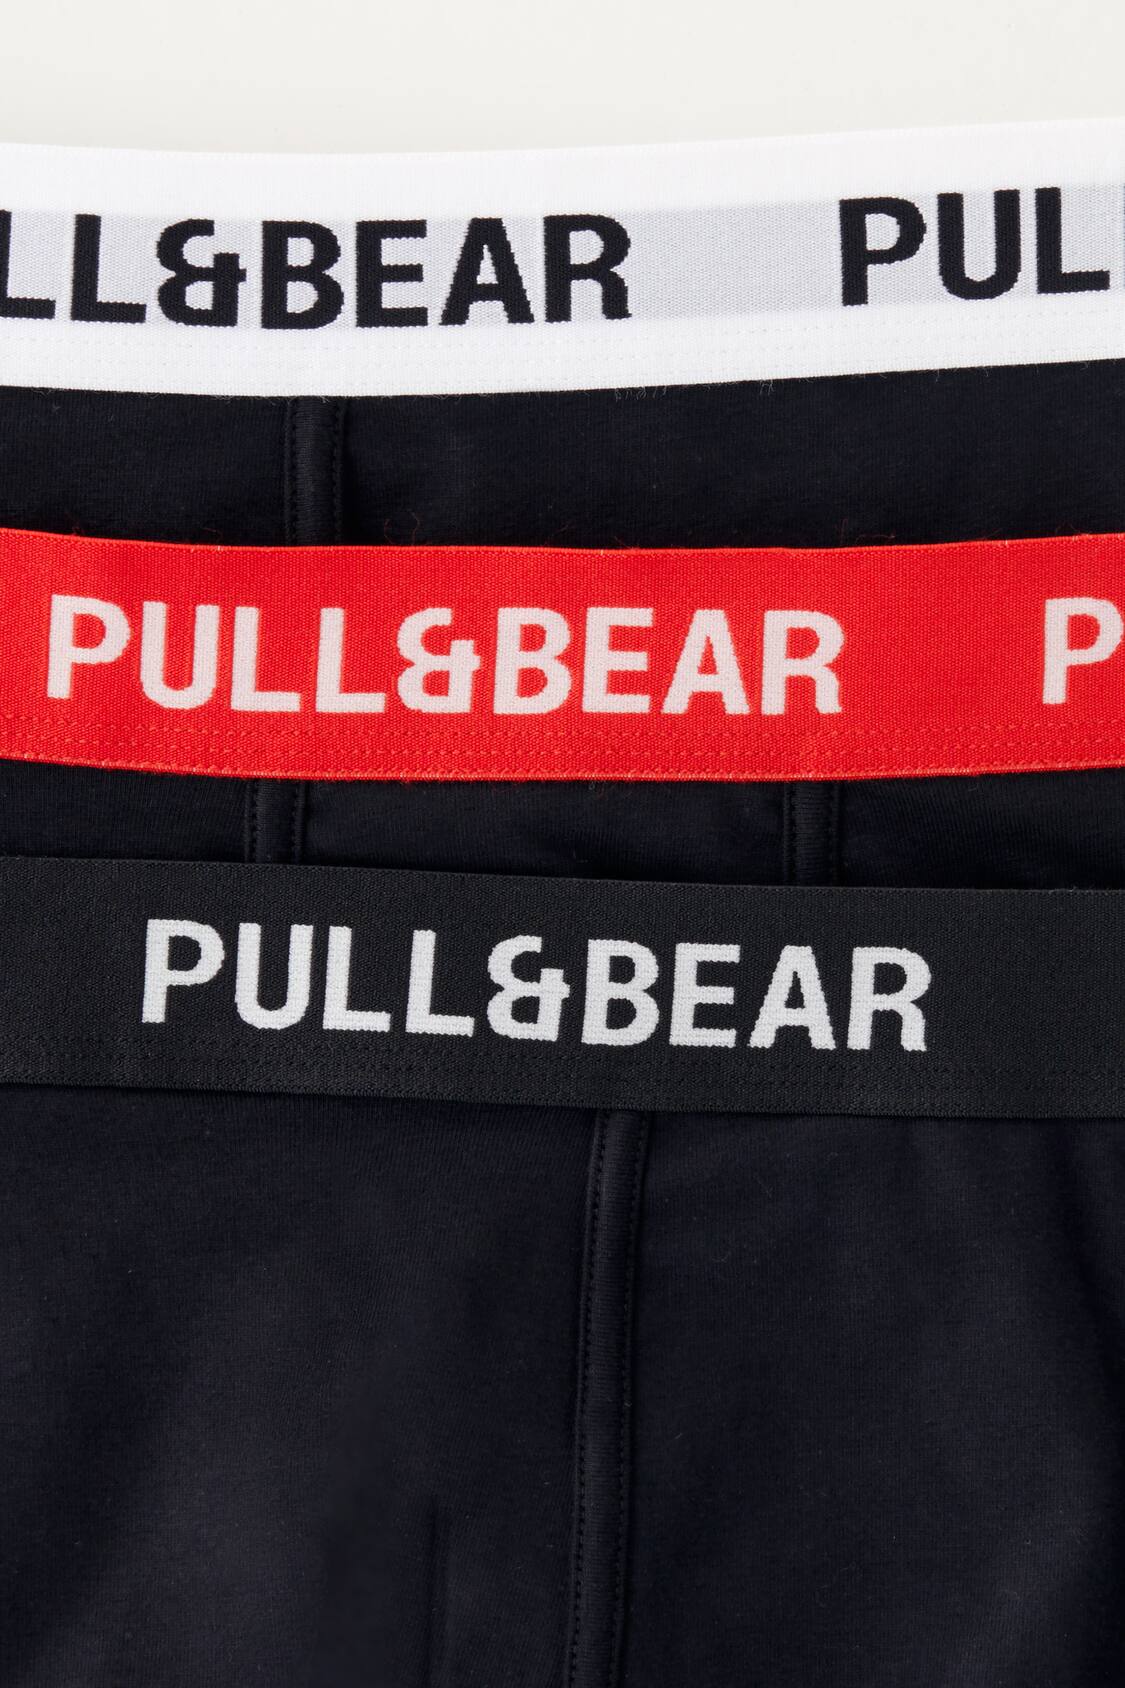 3-pack of boxers - pull&bear